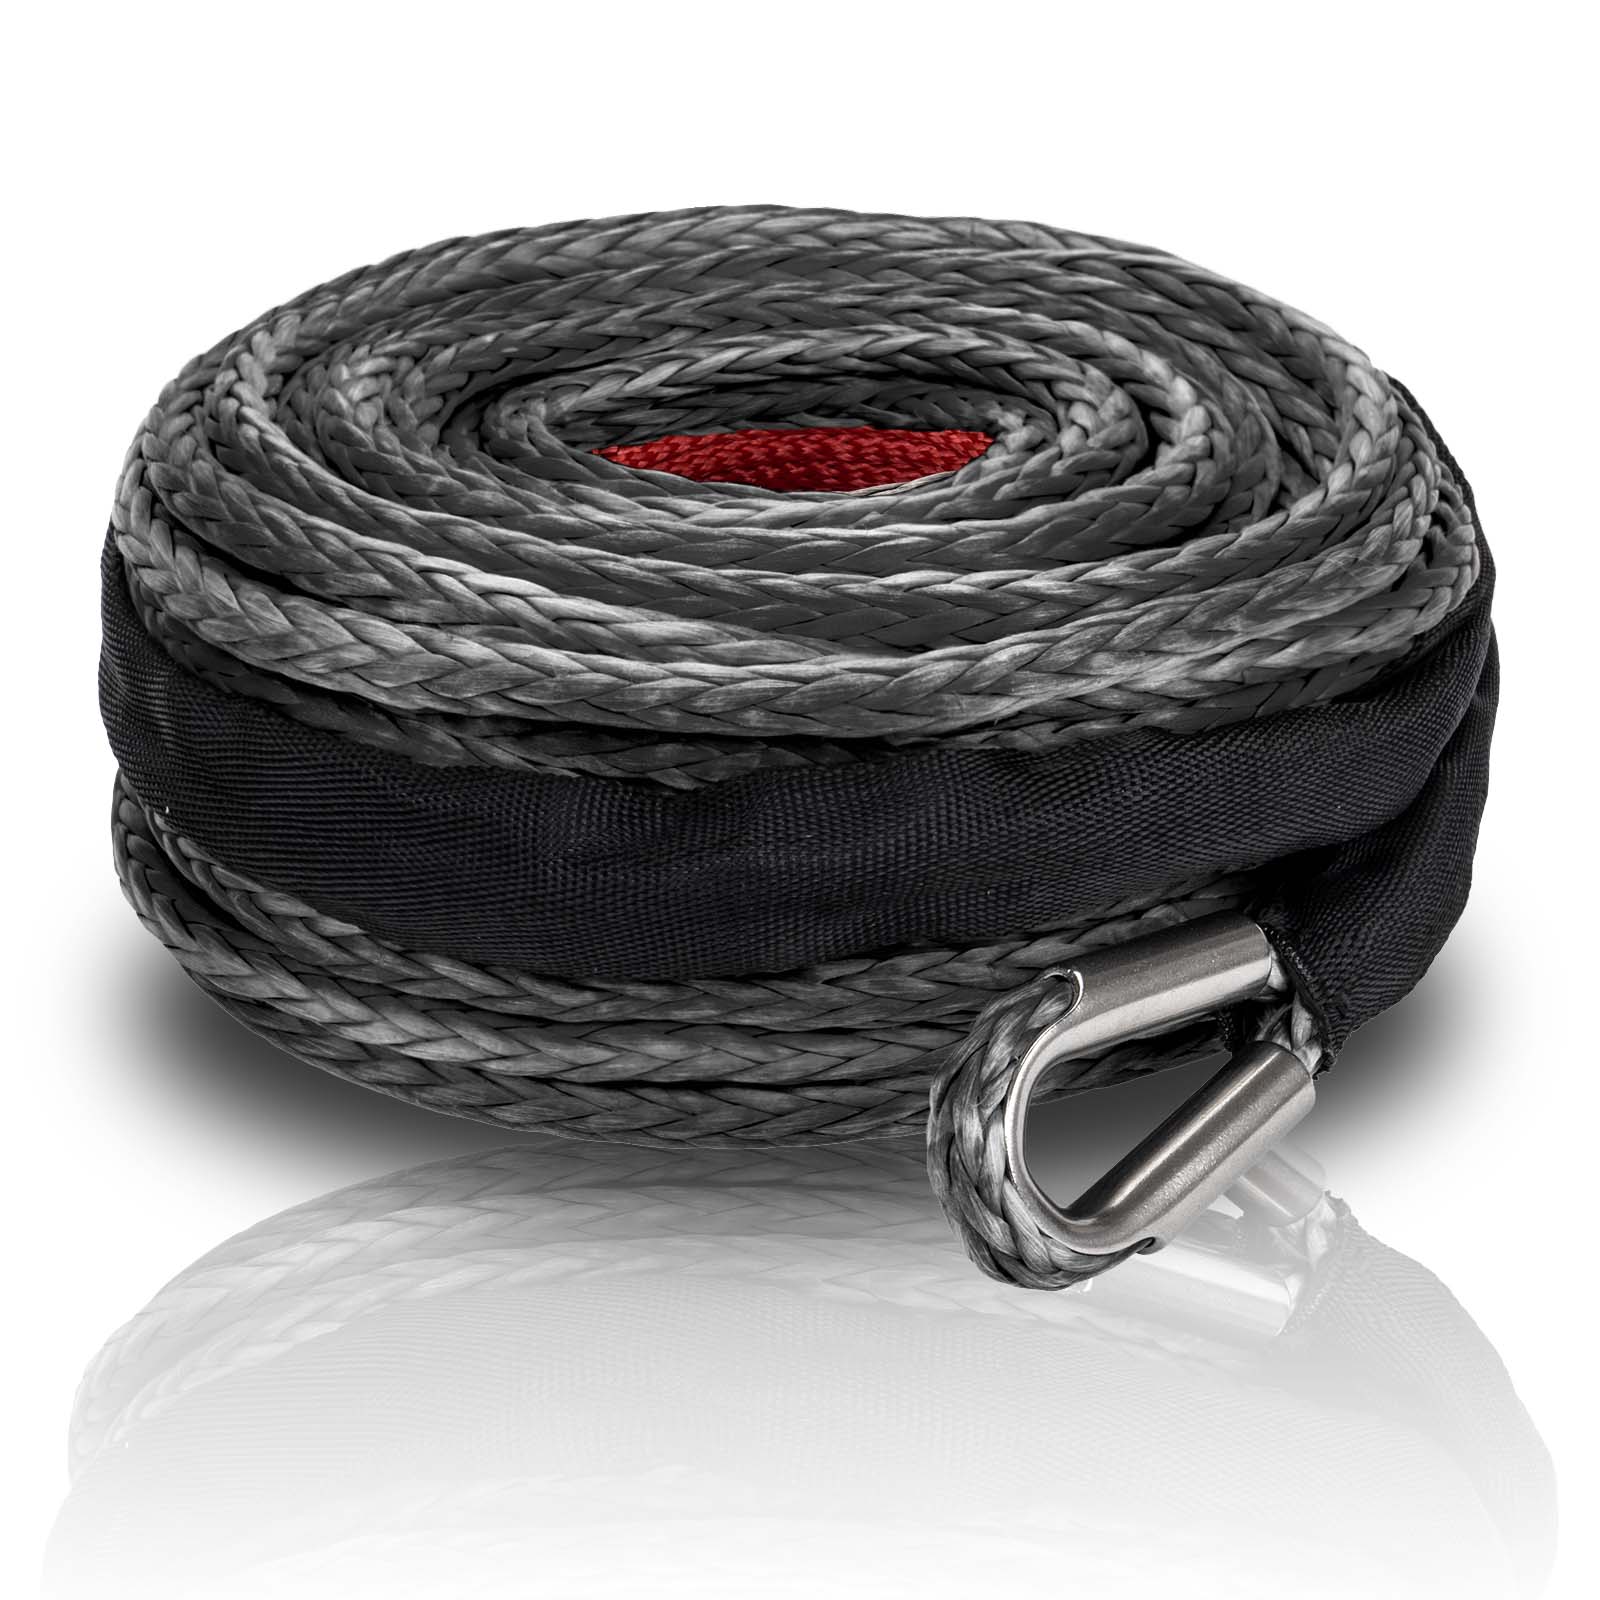 OPENROAD Synthetic Winch Rope, 3/8 x 85'-18000 LBs Winch Line Rope Re –